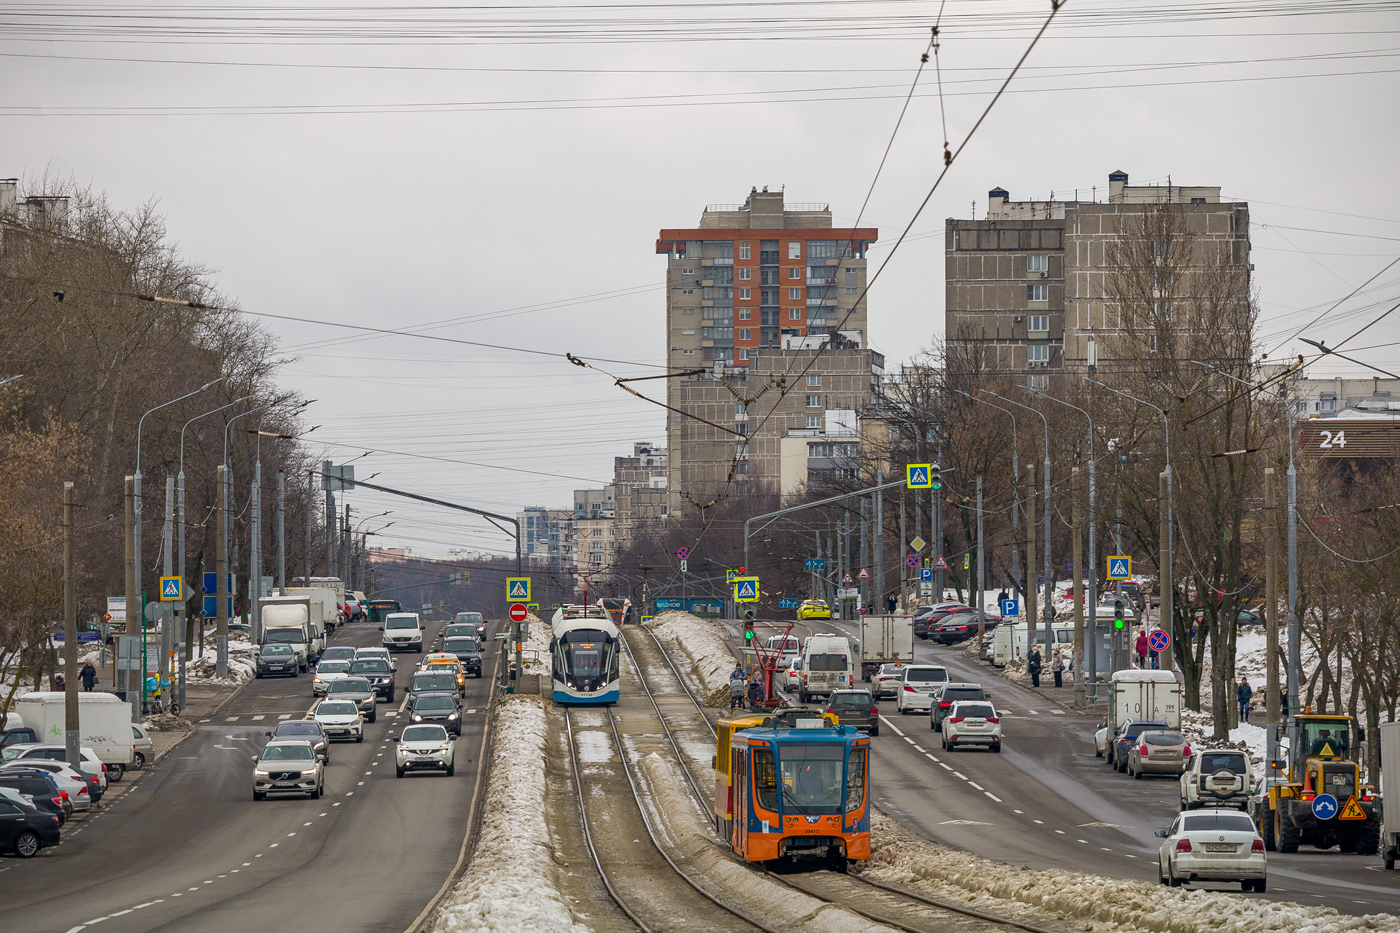 Moscow, 71-623-02 # 30412; Moscow — Tram lines: South Administrative District